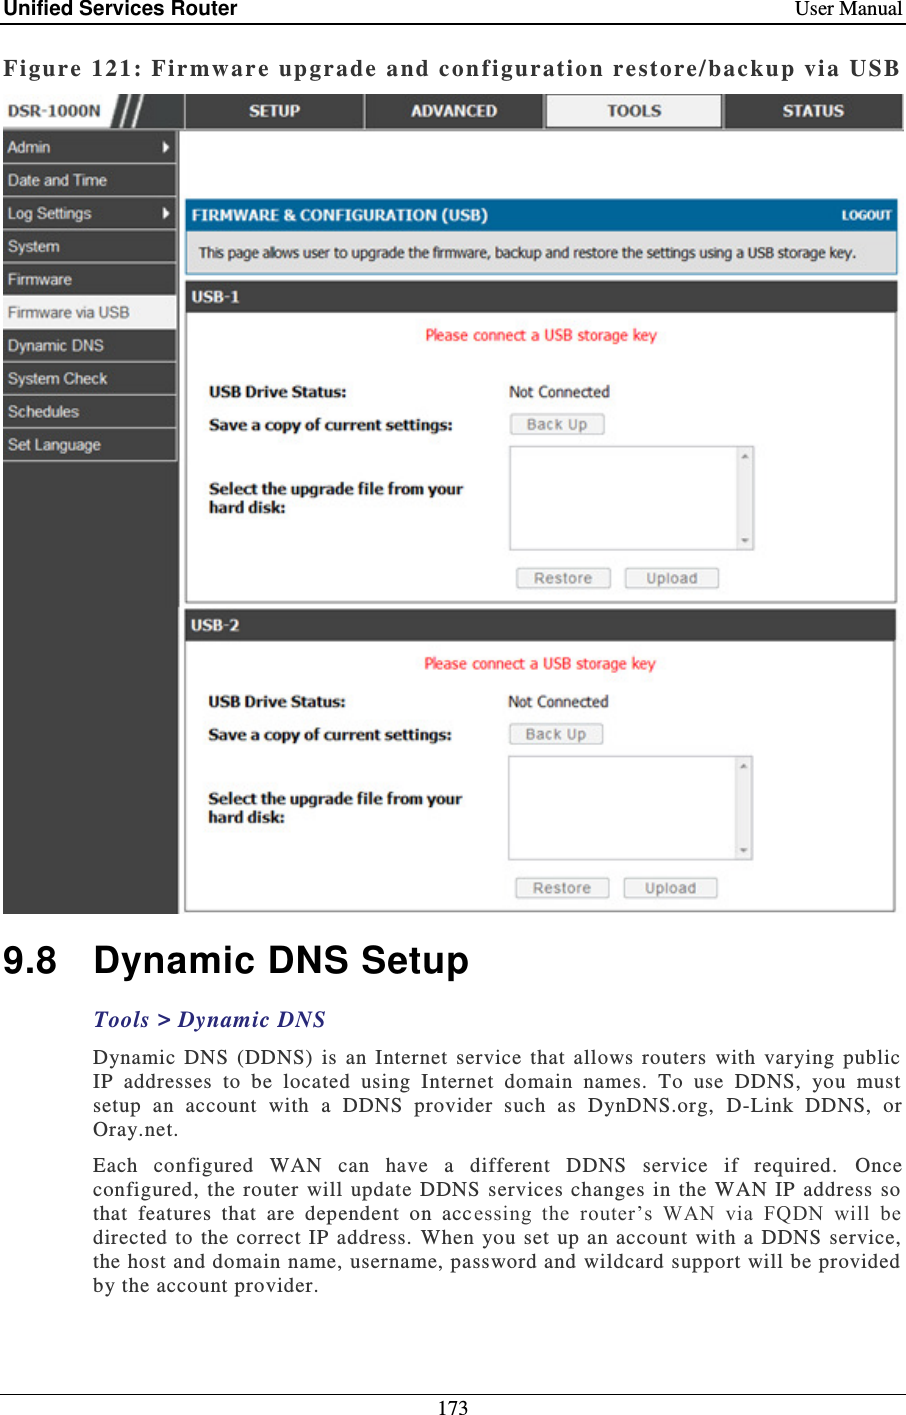 Unified Services Router    User Manual 173  Figure 121: Firmware upgrade  a nd con figuratio n restore/backup vi a USB   9.8  Dynamic DNS Setup Tools &gt; Dynamic DNS Dynamic  DNS  (DDNS)  is  an  Internet  service  that  allows  routers  with  varying  public IP  addresses  to  be  located  using  Internet  domain  names.  To  use  DDNS,  you  must setup  an  account  with  a  DDNS  provider  such  as  DynDNS.org,  D-Link  DDNS,  or Oray.net.  Each  configured  WAN  can  have  a  different  DDNS  service  if  required.   Once configured,  the router  will  update DDNS services changes in the  WAN IP  address  so that  features  that  are  dependent  on  acc essing  the  router’s  WAN  via  FQDN  will  be directed to  the correct IP  address.   When you  set  up an account  with a  DDNS  service, the host and domain name, username, password and wildcard support will be provided by the account provider.  